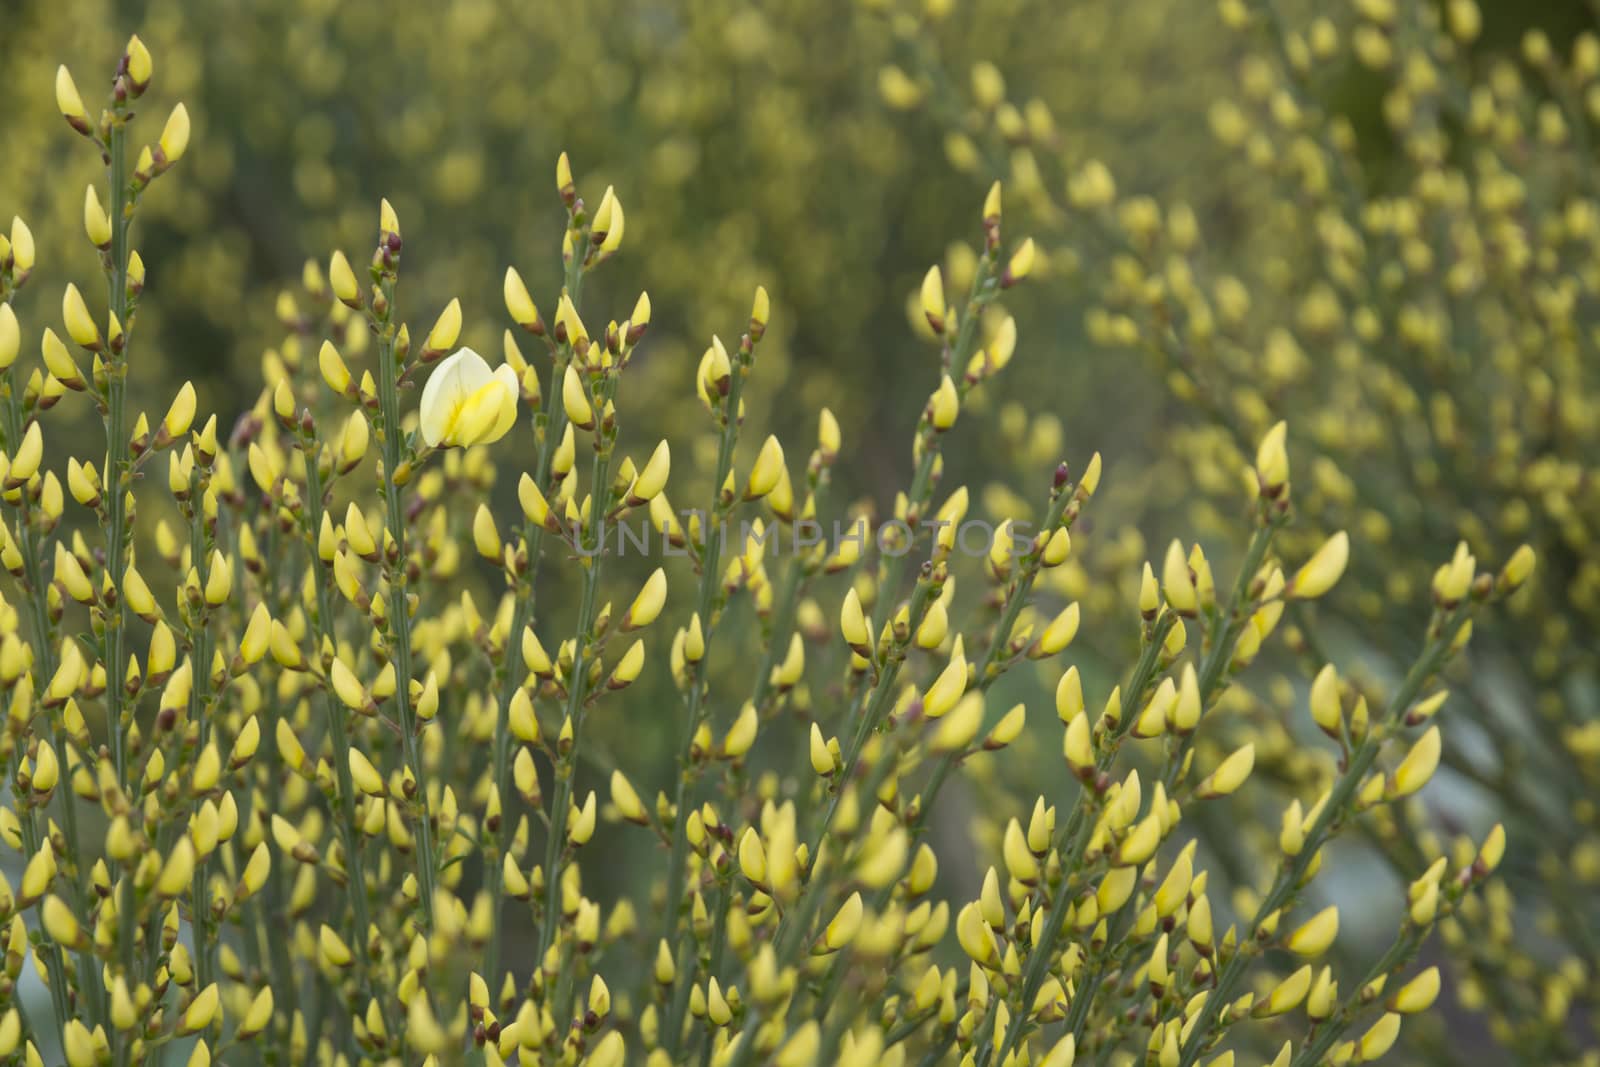 Warminster broom, Cytisus x praecox, blossoming in May by ArtesiaWells